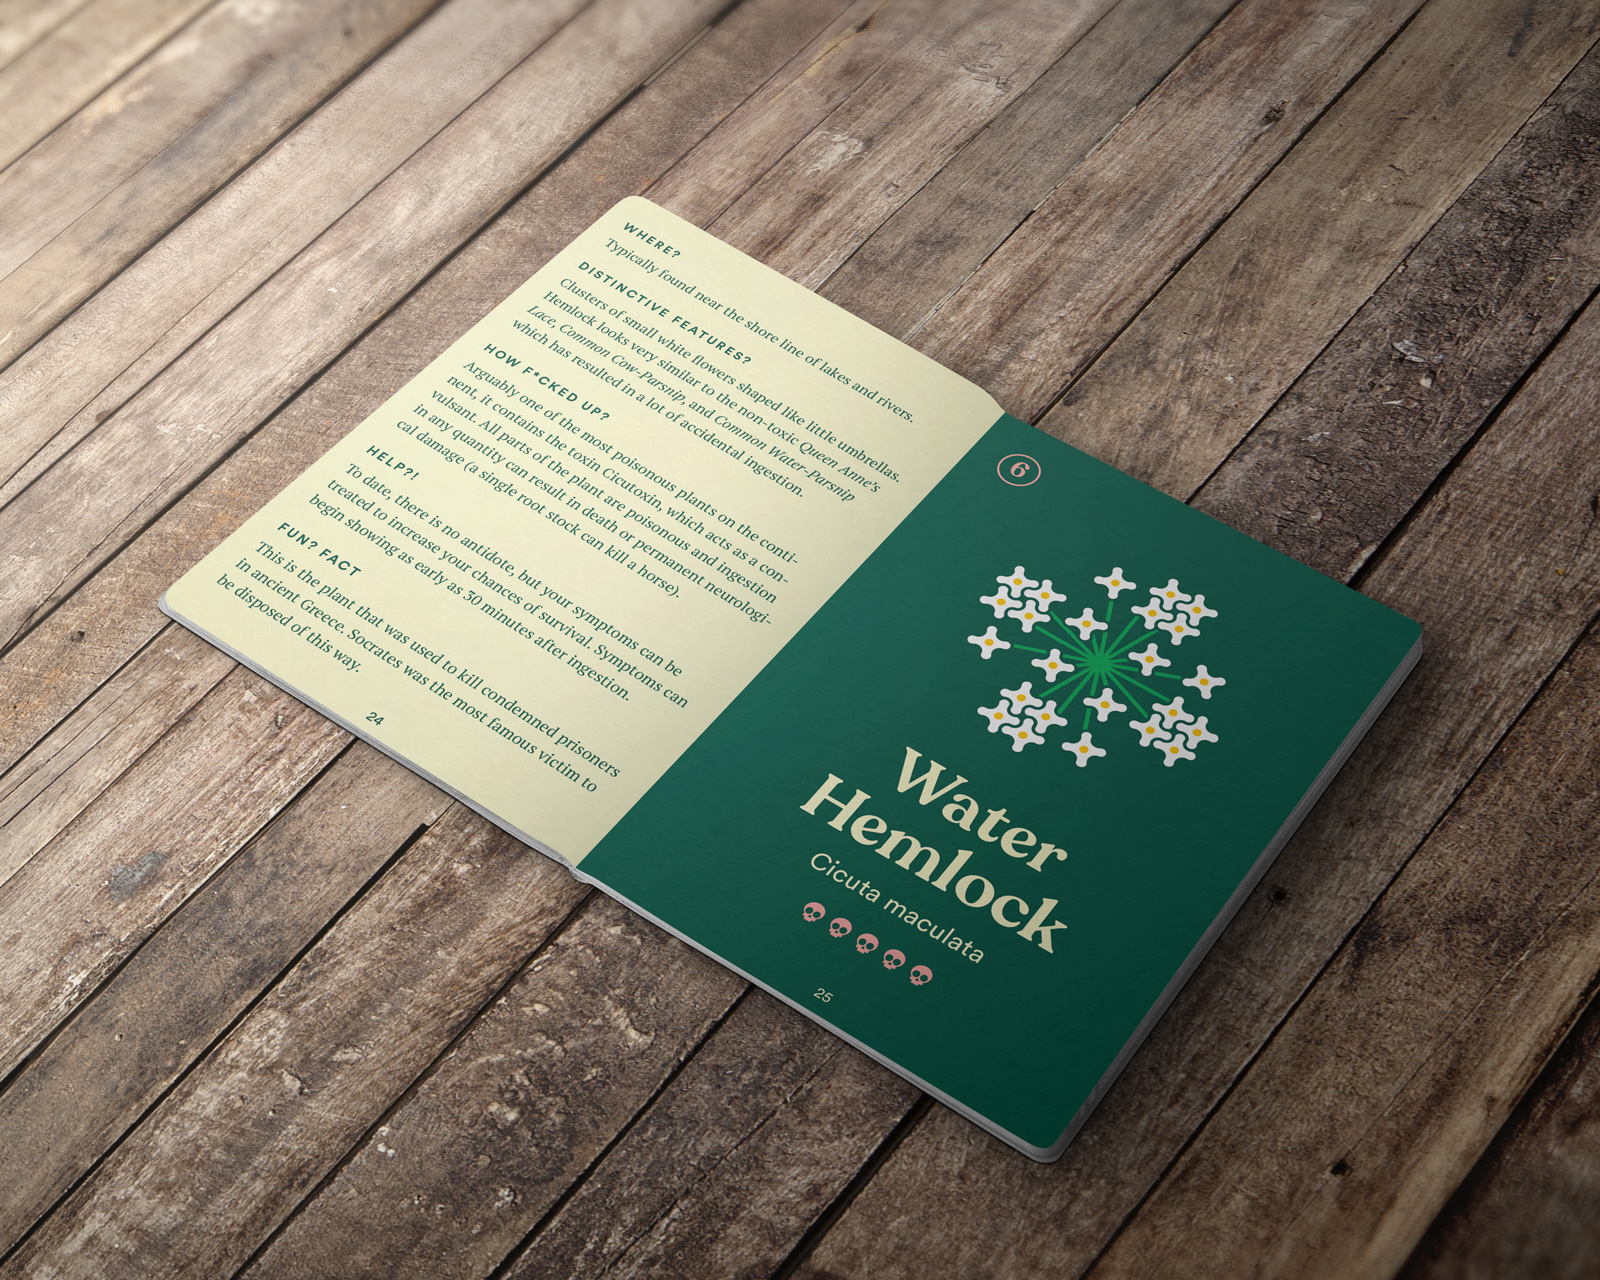 Camp passport open against a wooden floor, information about water hemlock is shown along with an illustration of the plant.